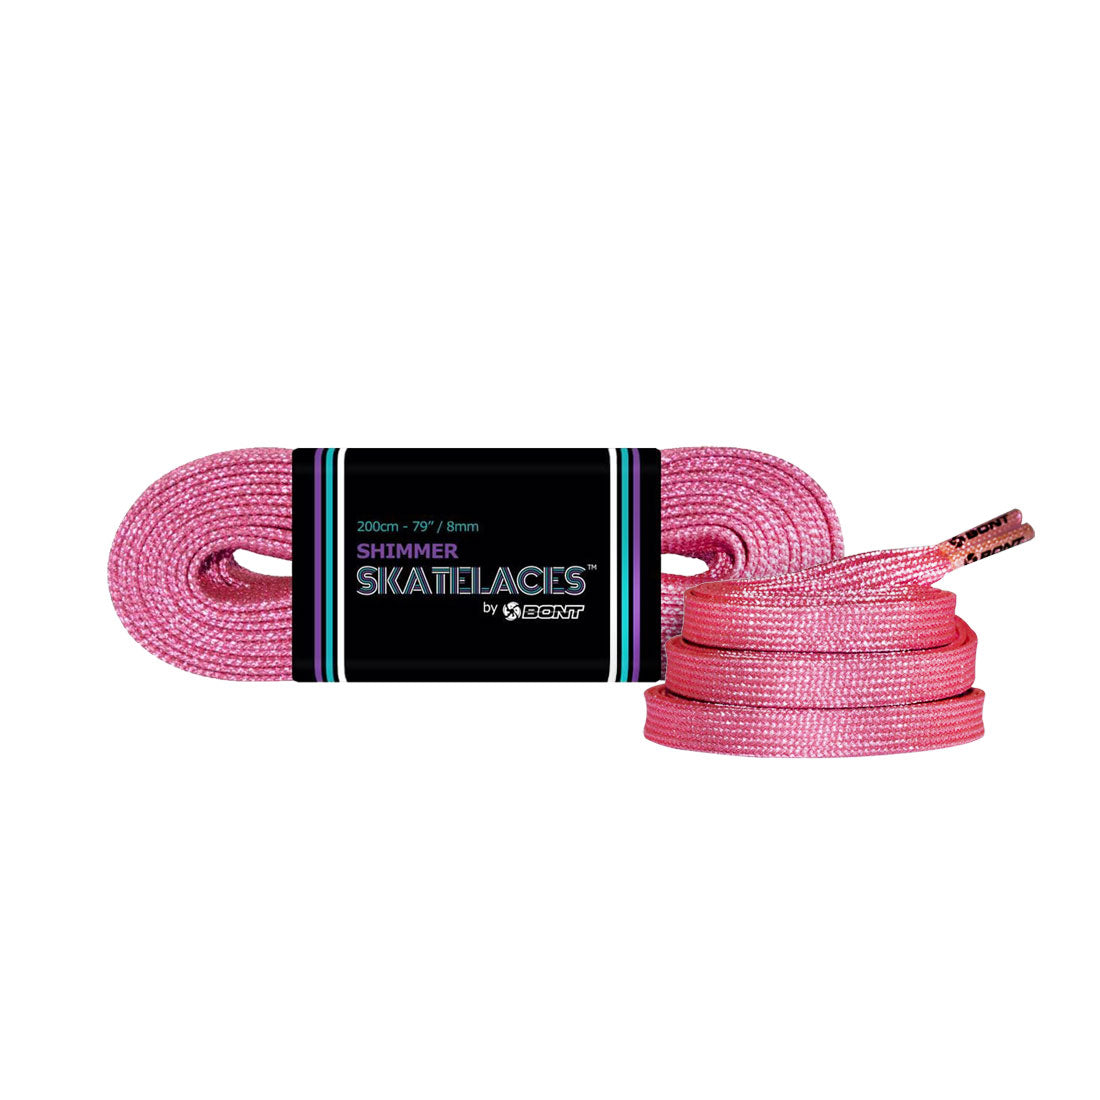 Bont Shimmer 8mm Laces - 200cm/79in Jelly Bean Pink Laces